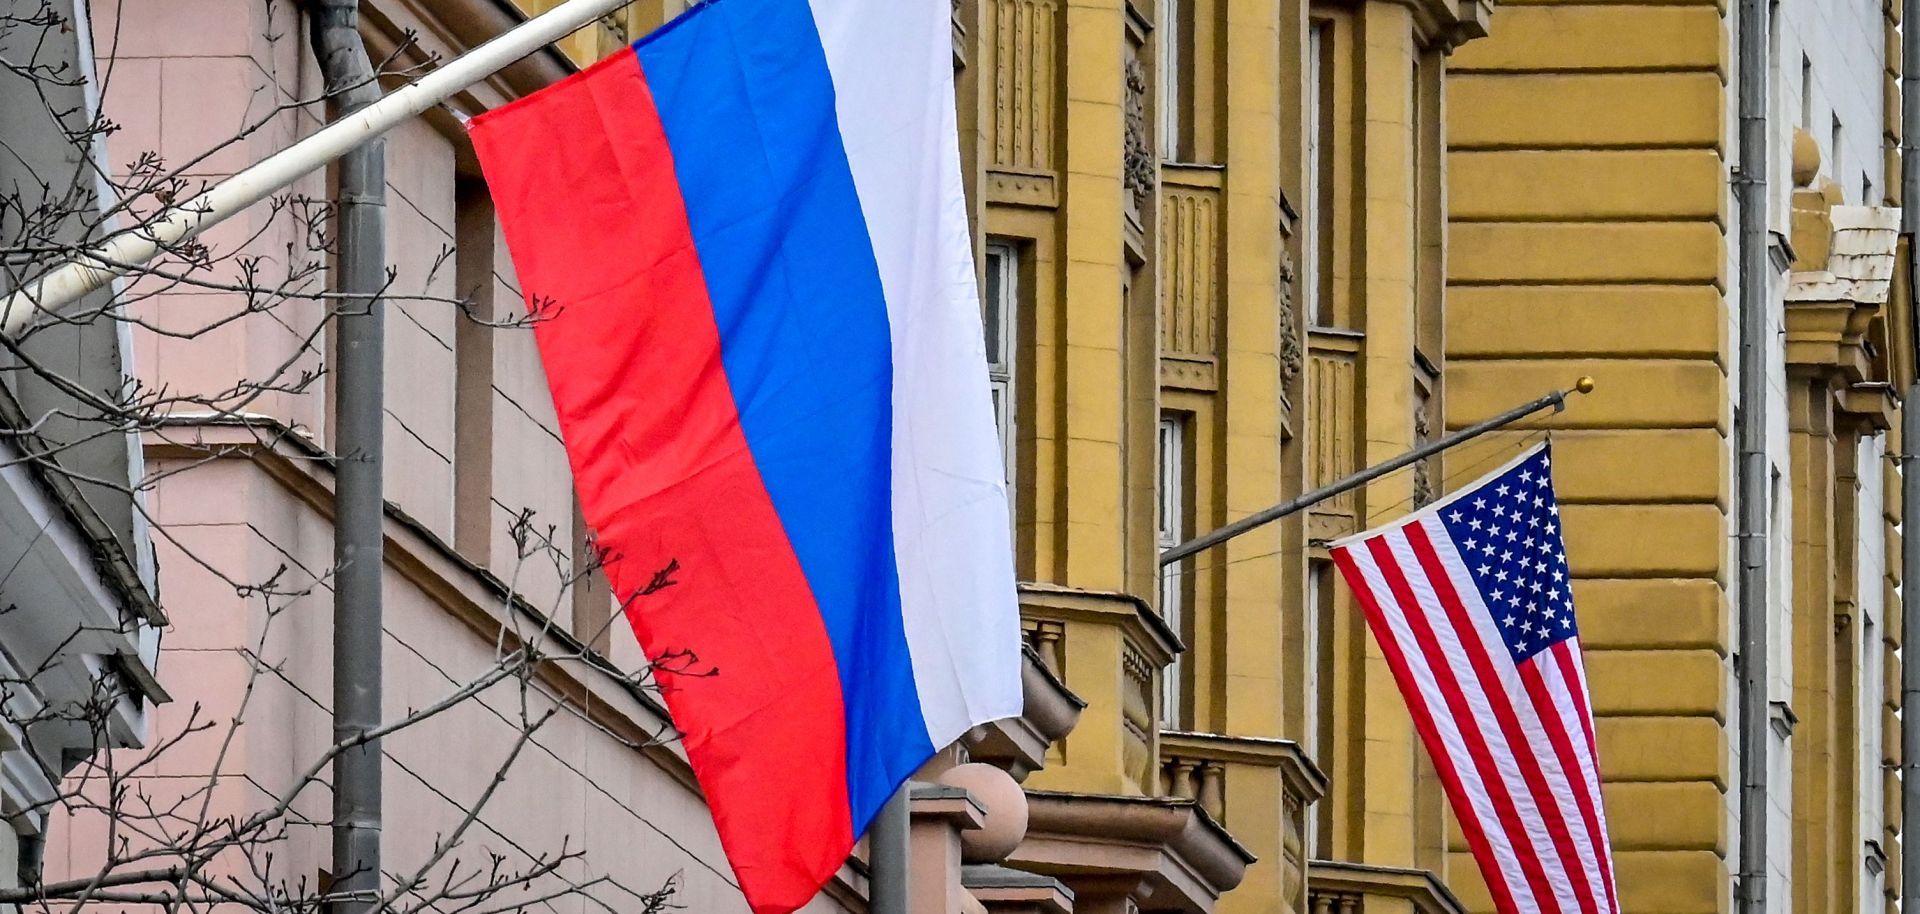 A Russian flag flies next to the U.S. Embassy building in Moscow, Russia, on March 18, 2021.